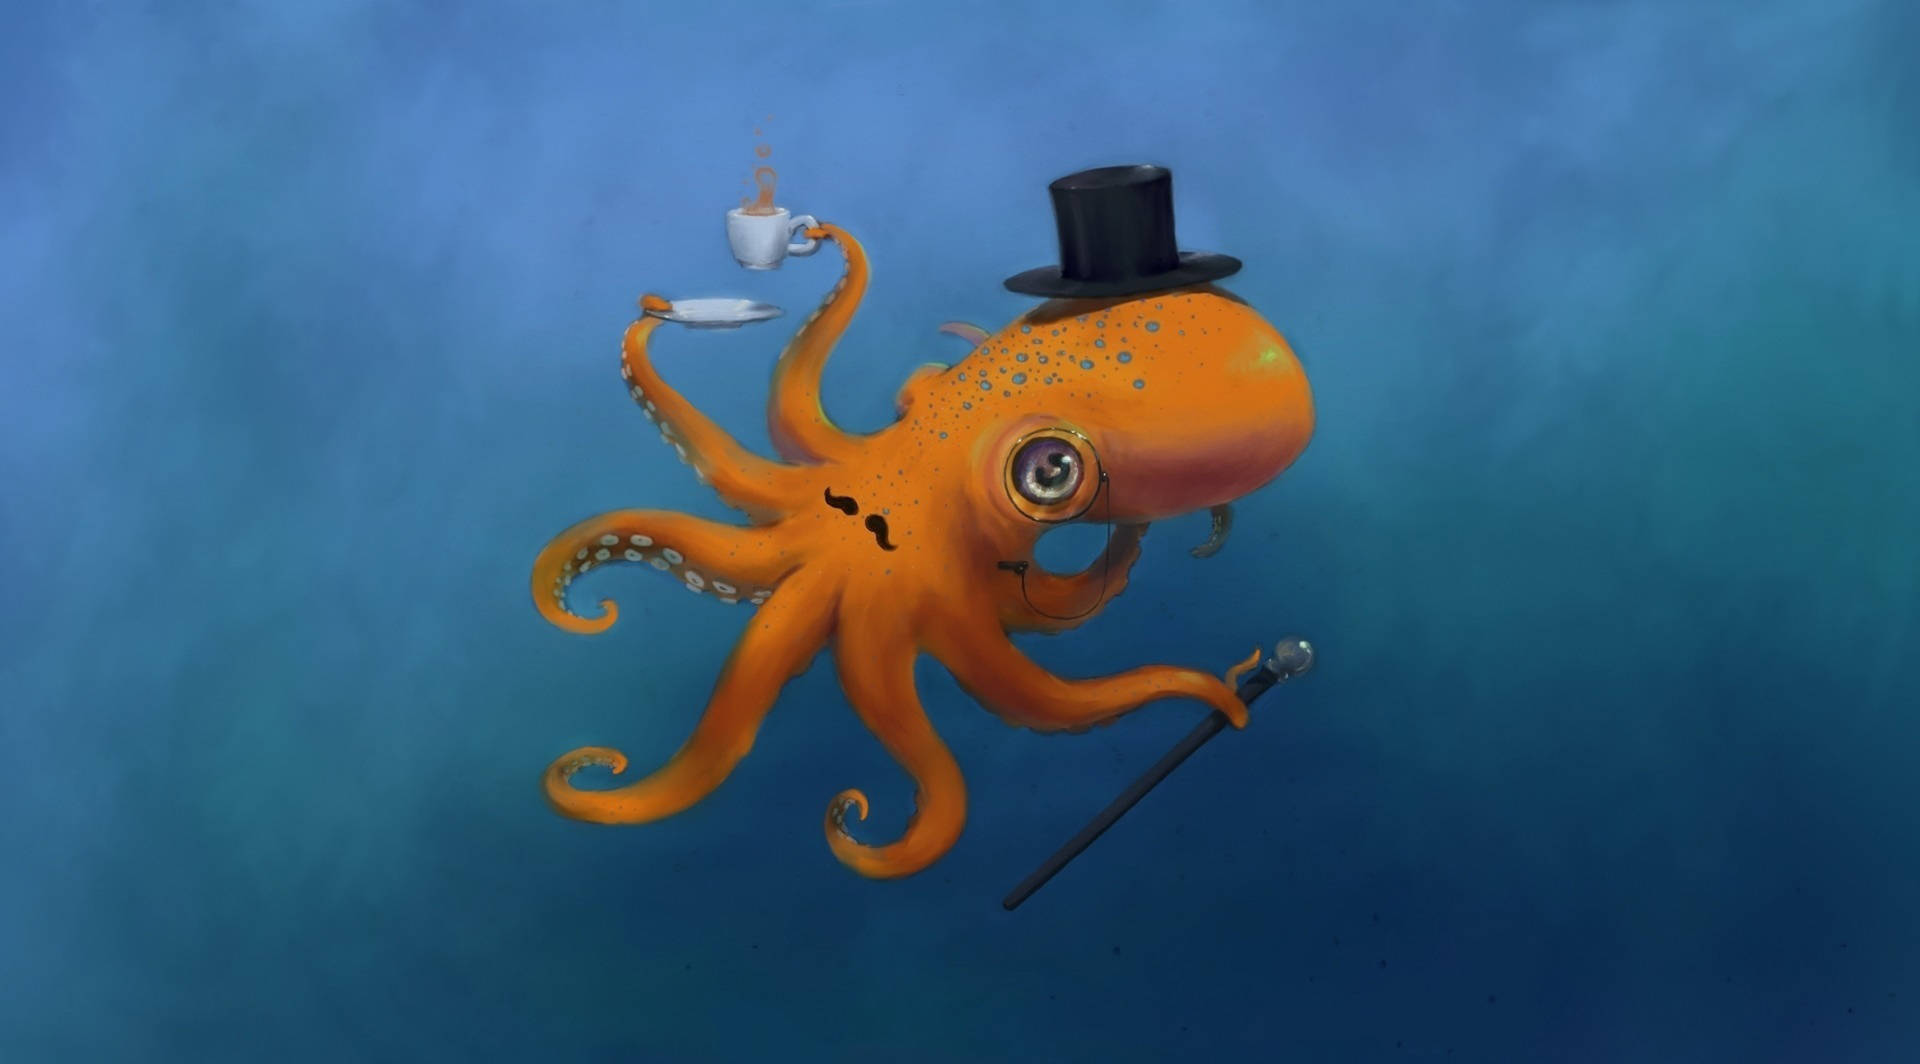 Mr. Octopus With Monocle